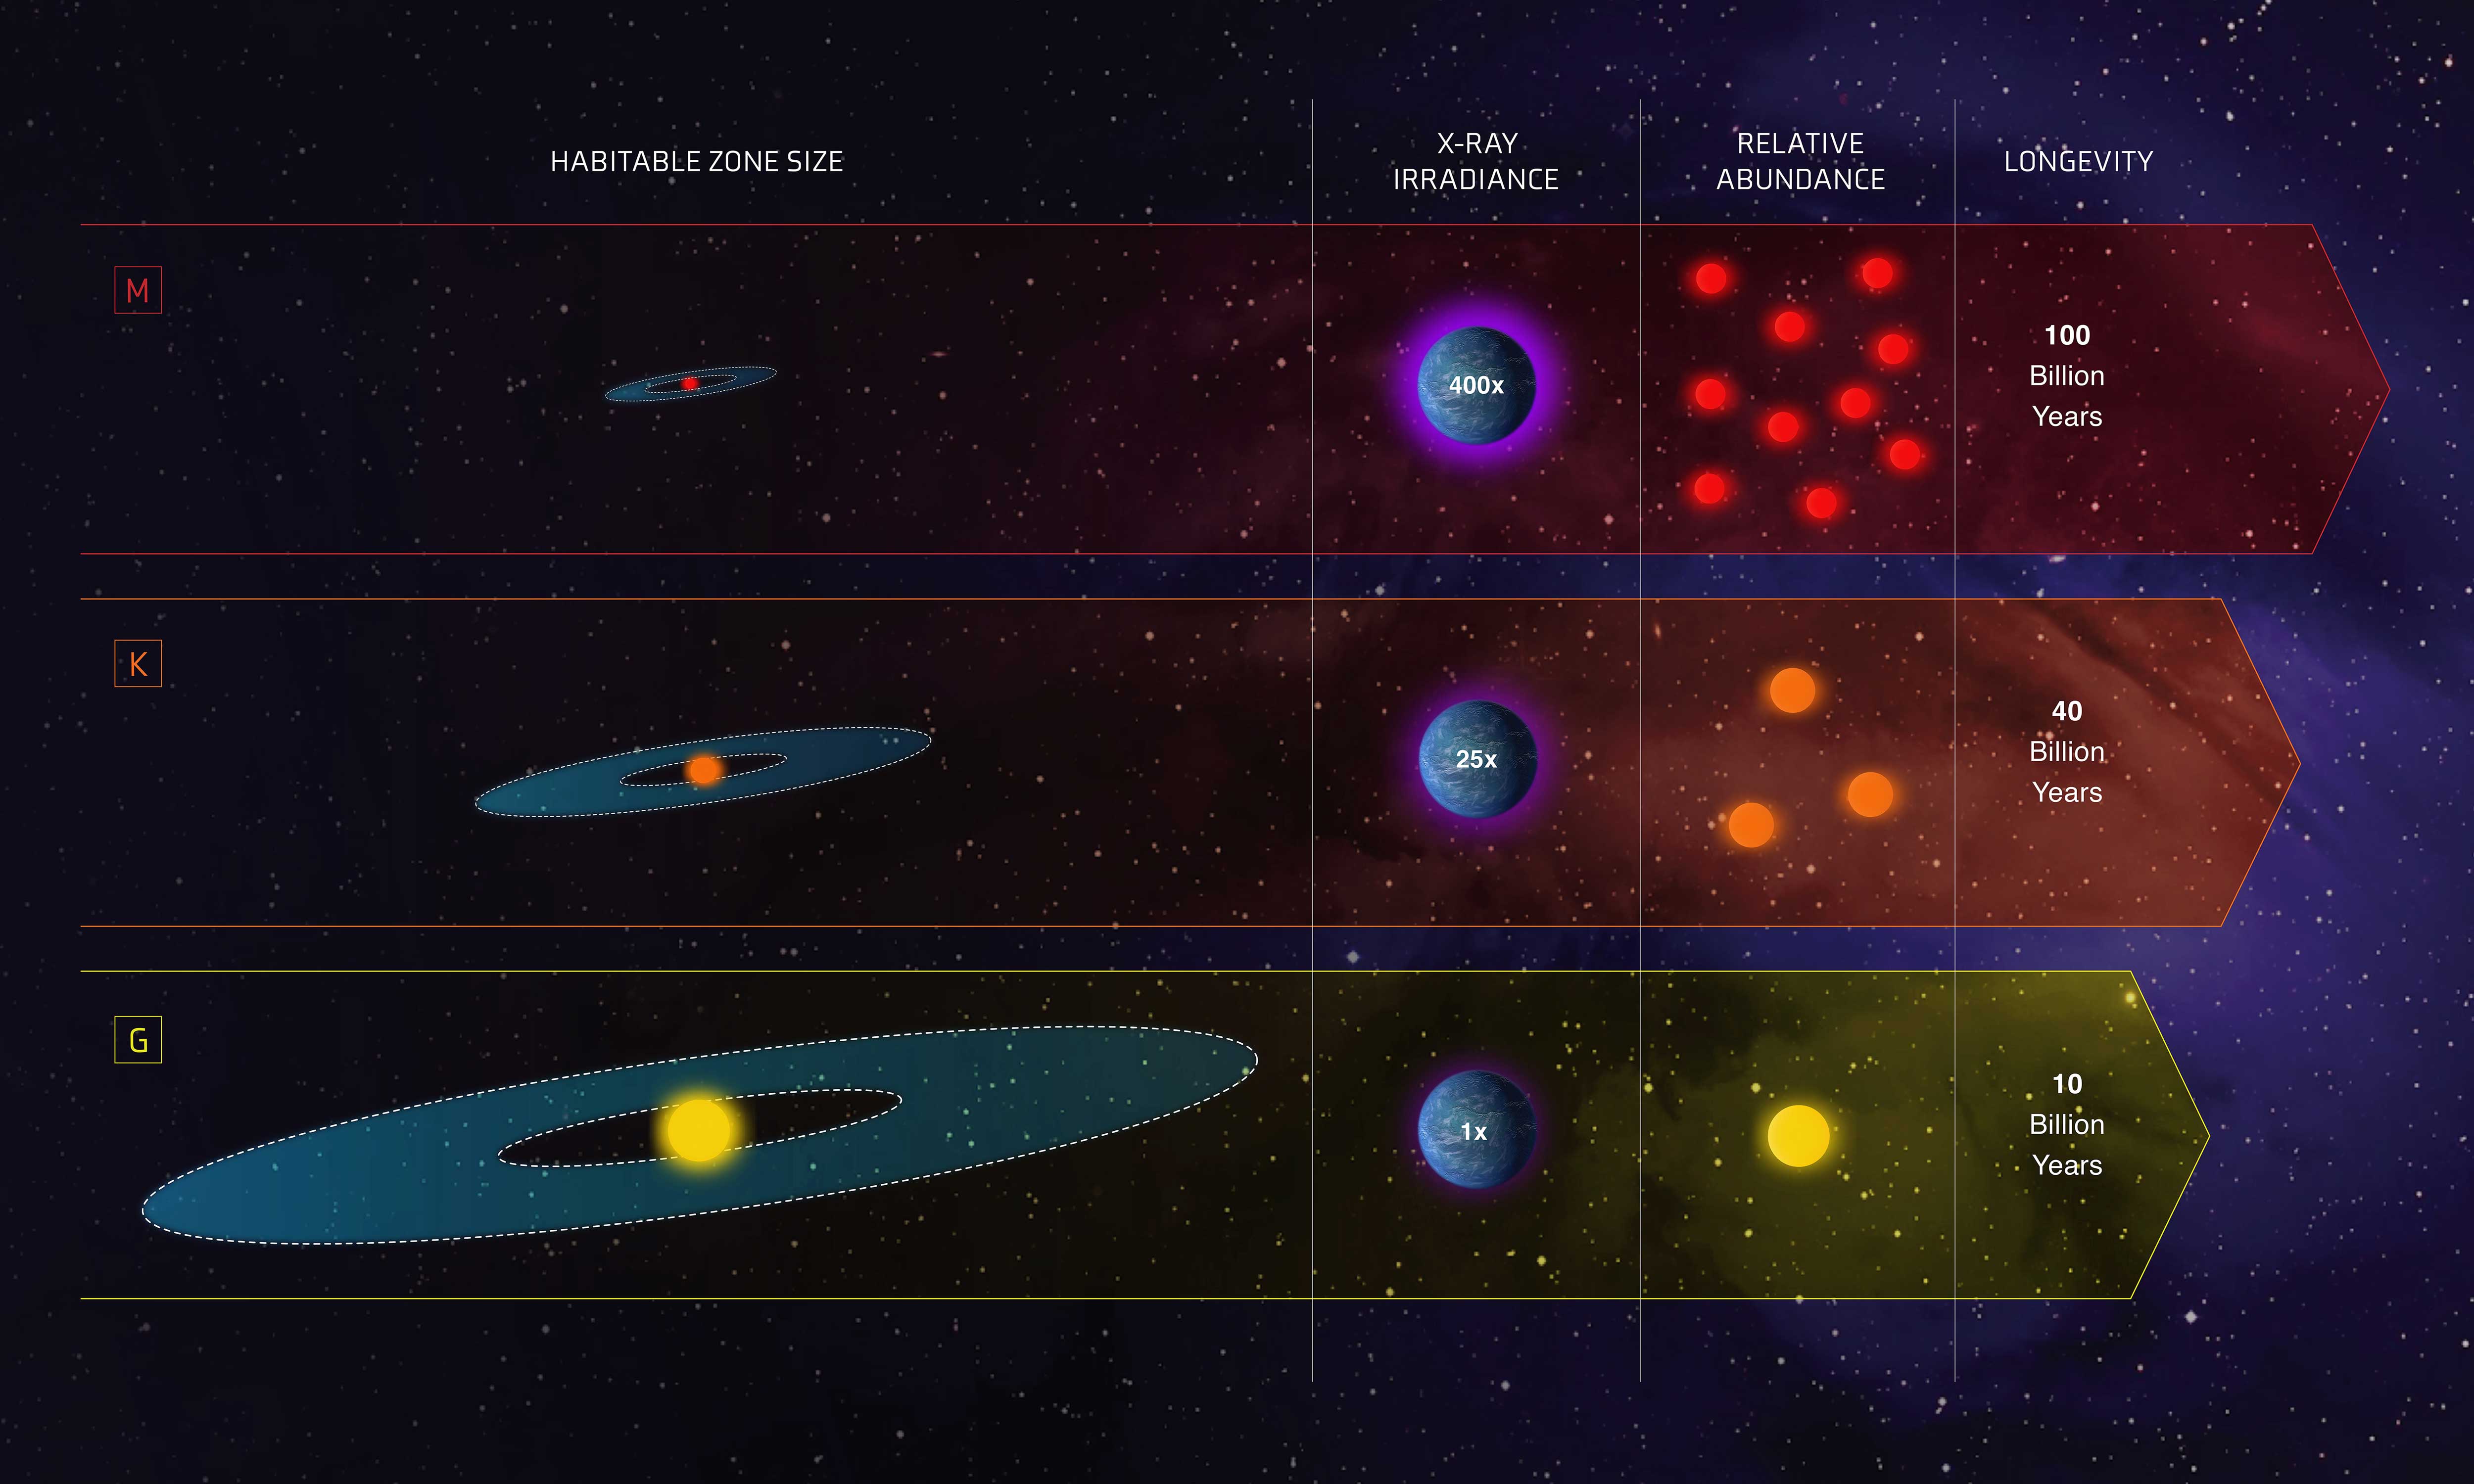 An infographic showing the habitable zones around three different star types. It's a small region close to M-type stars, the most prevalent in our galaxy. It's a bigger zone around K-type stars and the biggest habitable zone is around G-type stars, like our sun, but the star's life is 10 billion years, compared with 100 billion years for the prevalent M dwarfs.